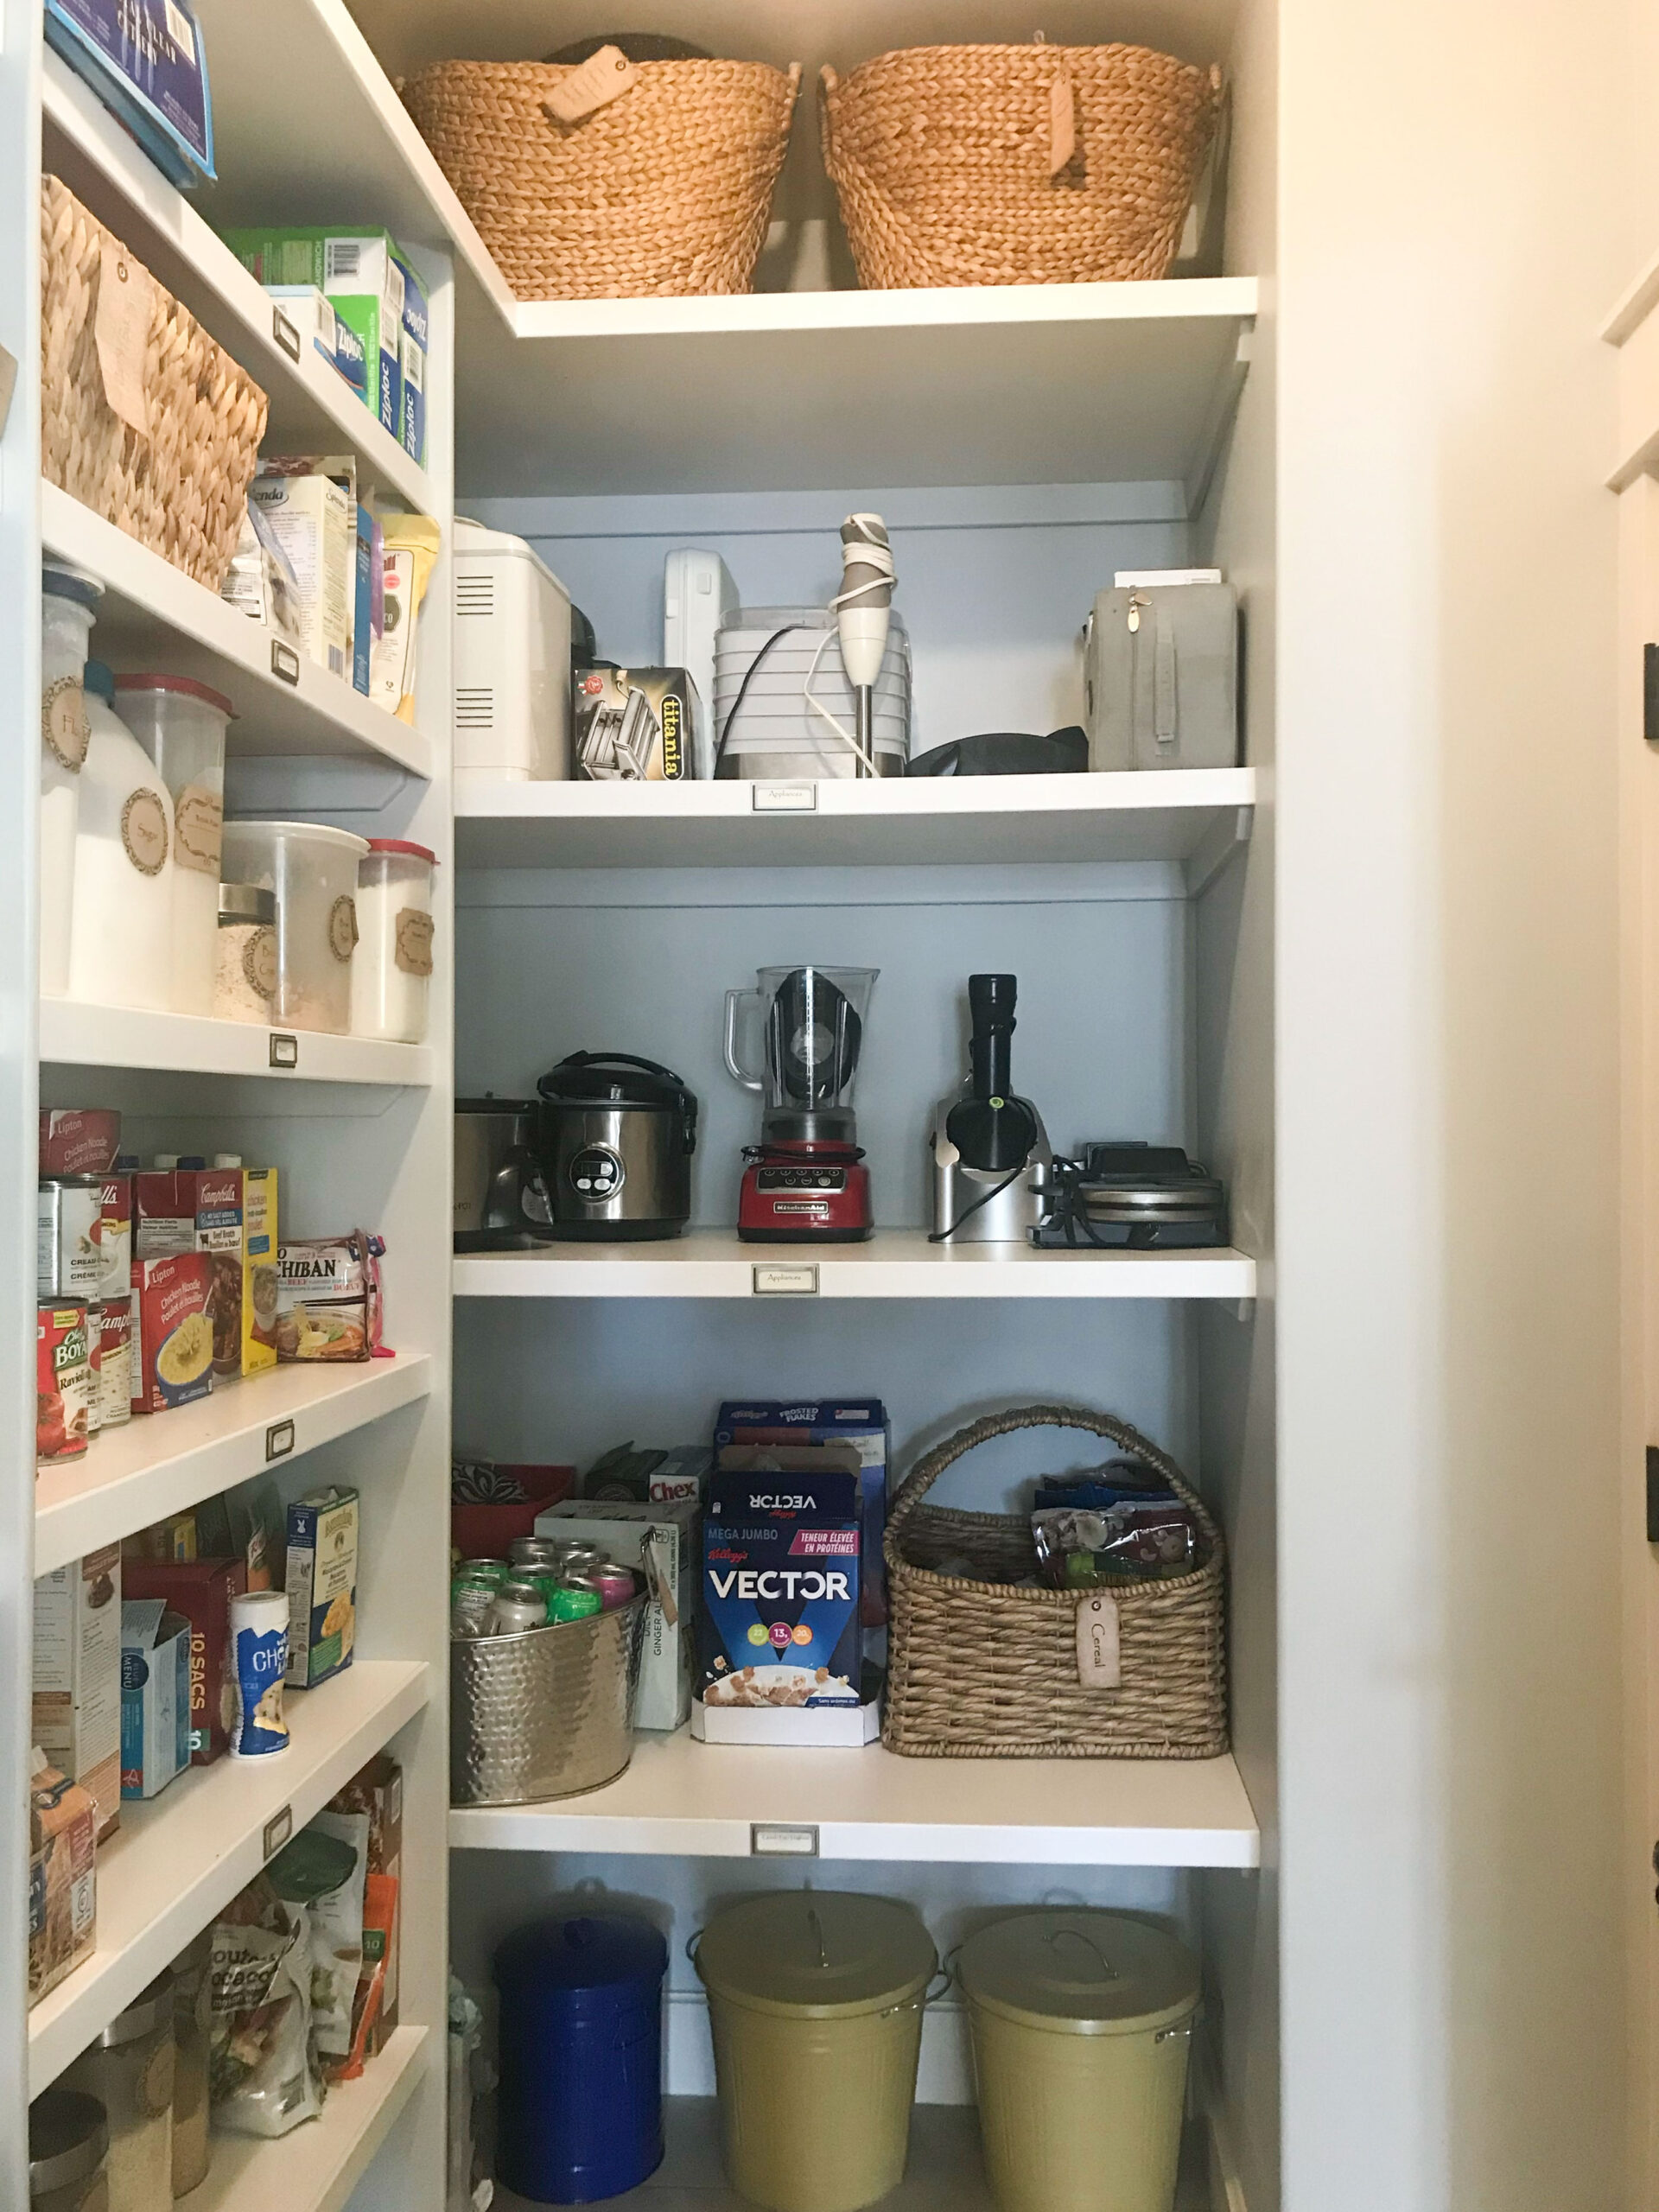 inside a large pantry with shallow shelves along the left wall and deeper taller shelves on the back wall